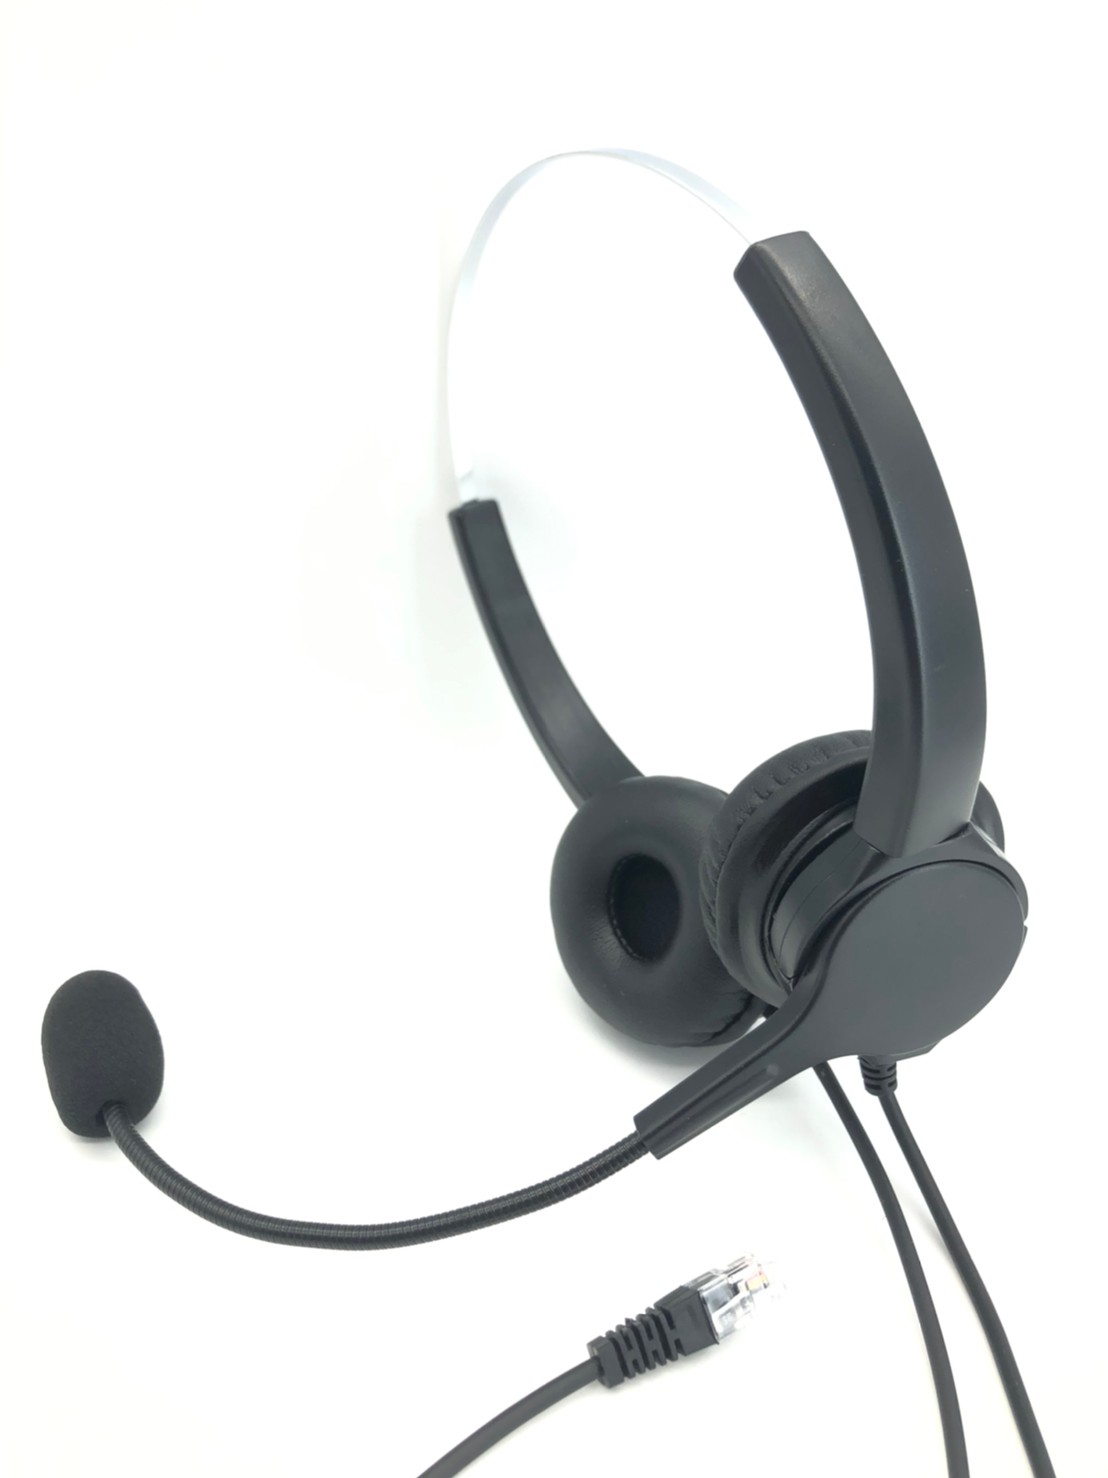 AASTRA 6757 HEADSET $1100元 頭戴式客服雙耳電話耳機麥克風 AASTRA電話耳機 AASTRA電話耳機麥克風 AASTRA行銷總機客服專用電話耳機麥克風